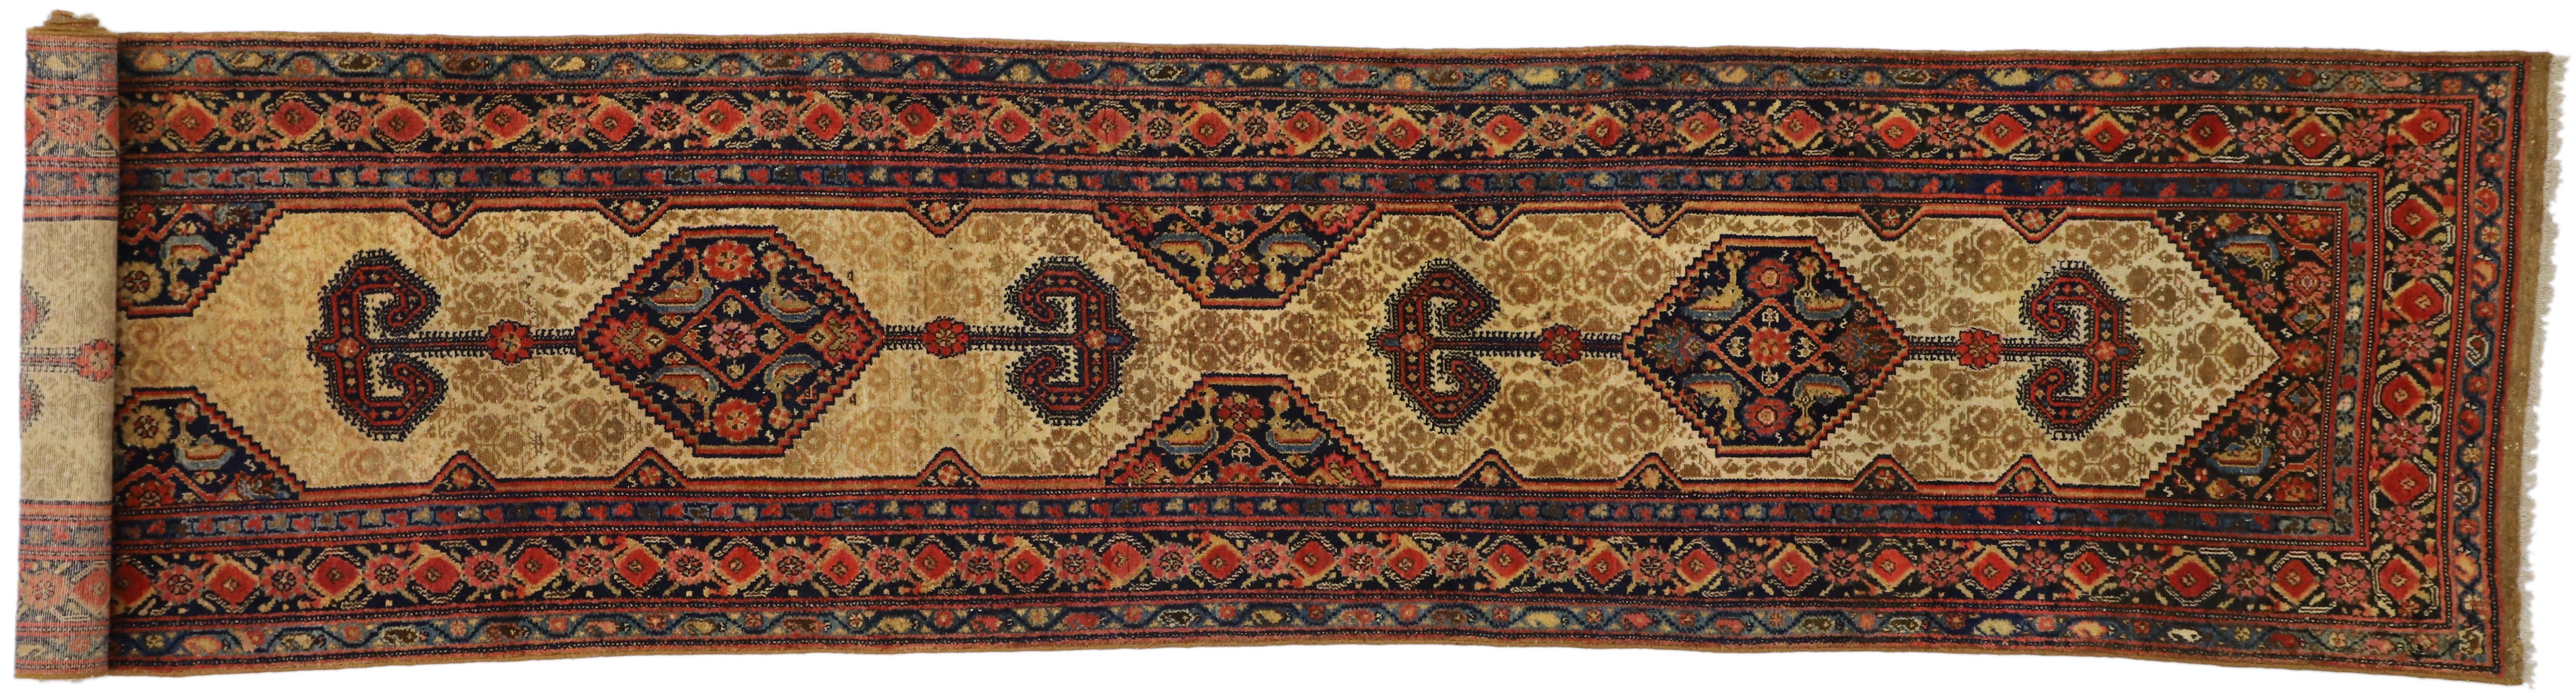 Antique Persian Malayer Long Hallway Runner with Tudor Manor House Style For Sale 2